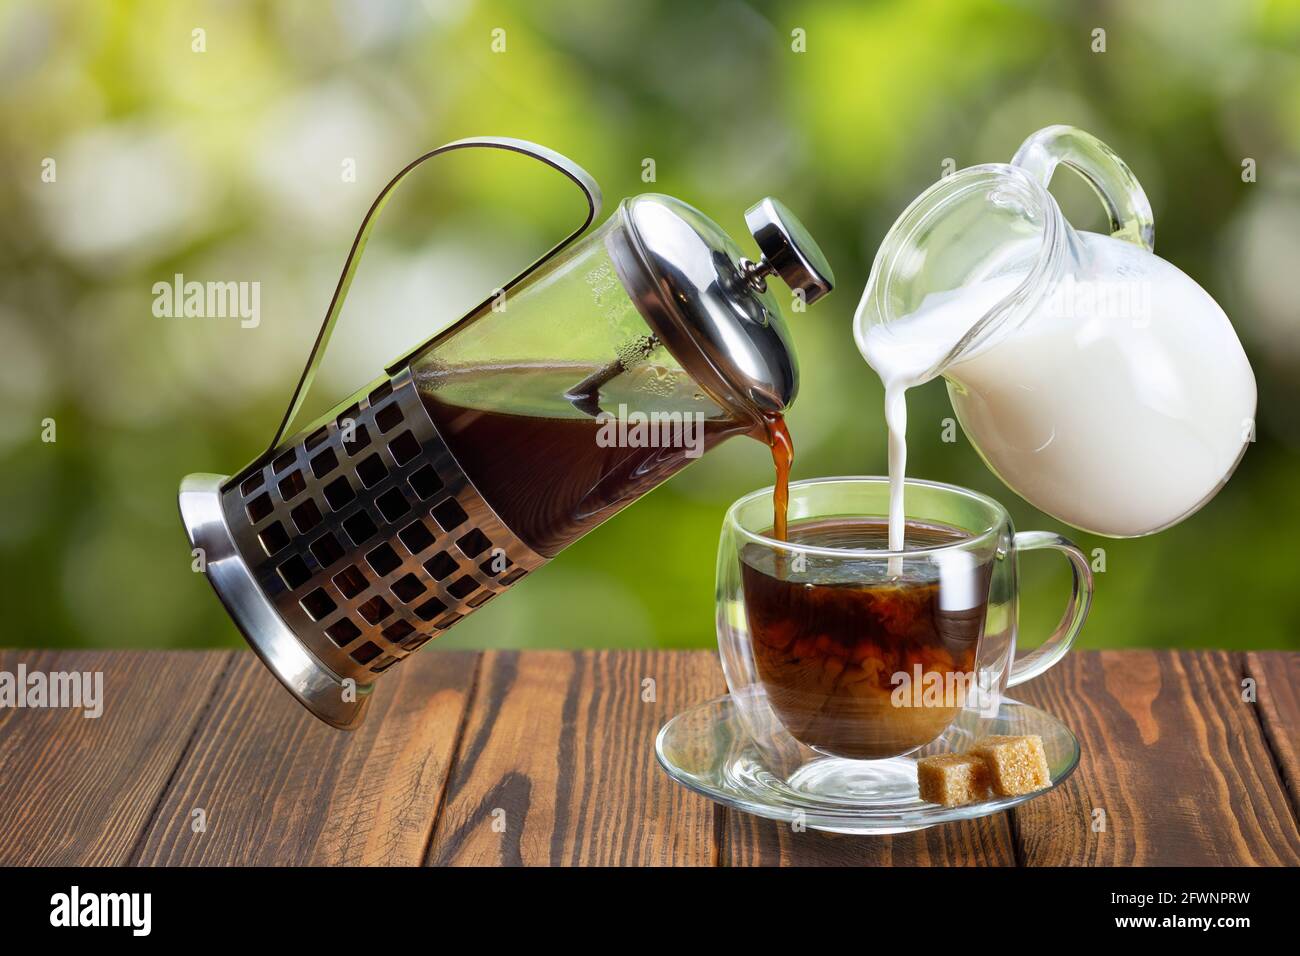 coffee and cream pouring into glass cup Stock Photo